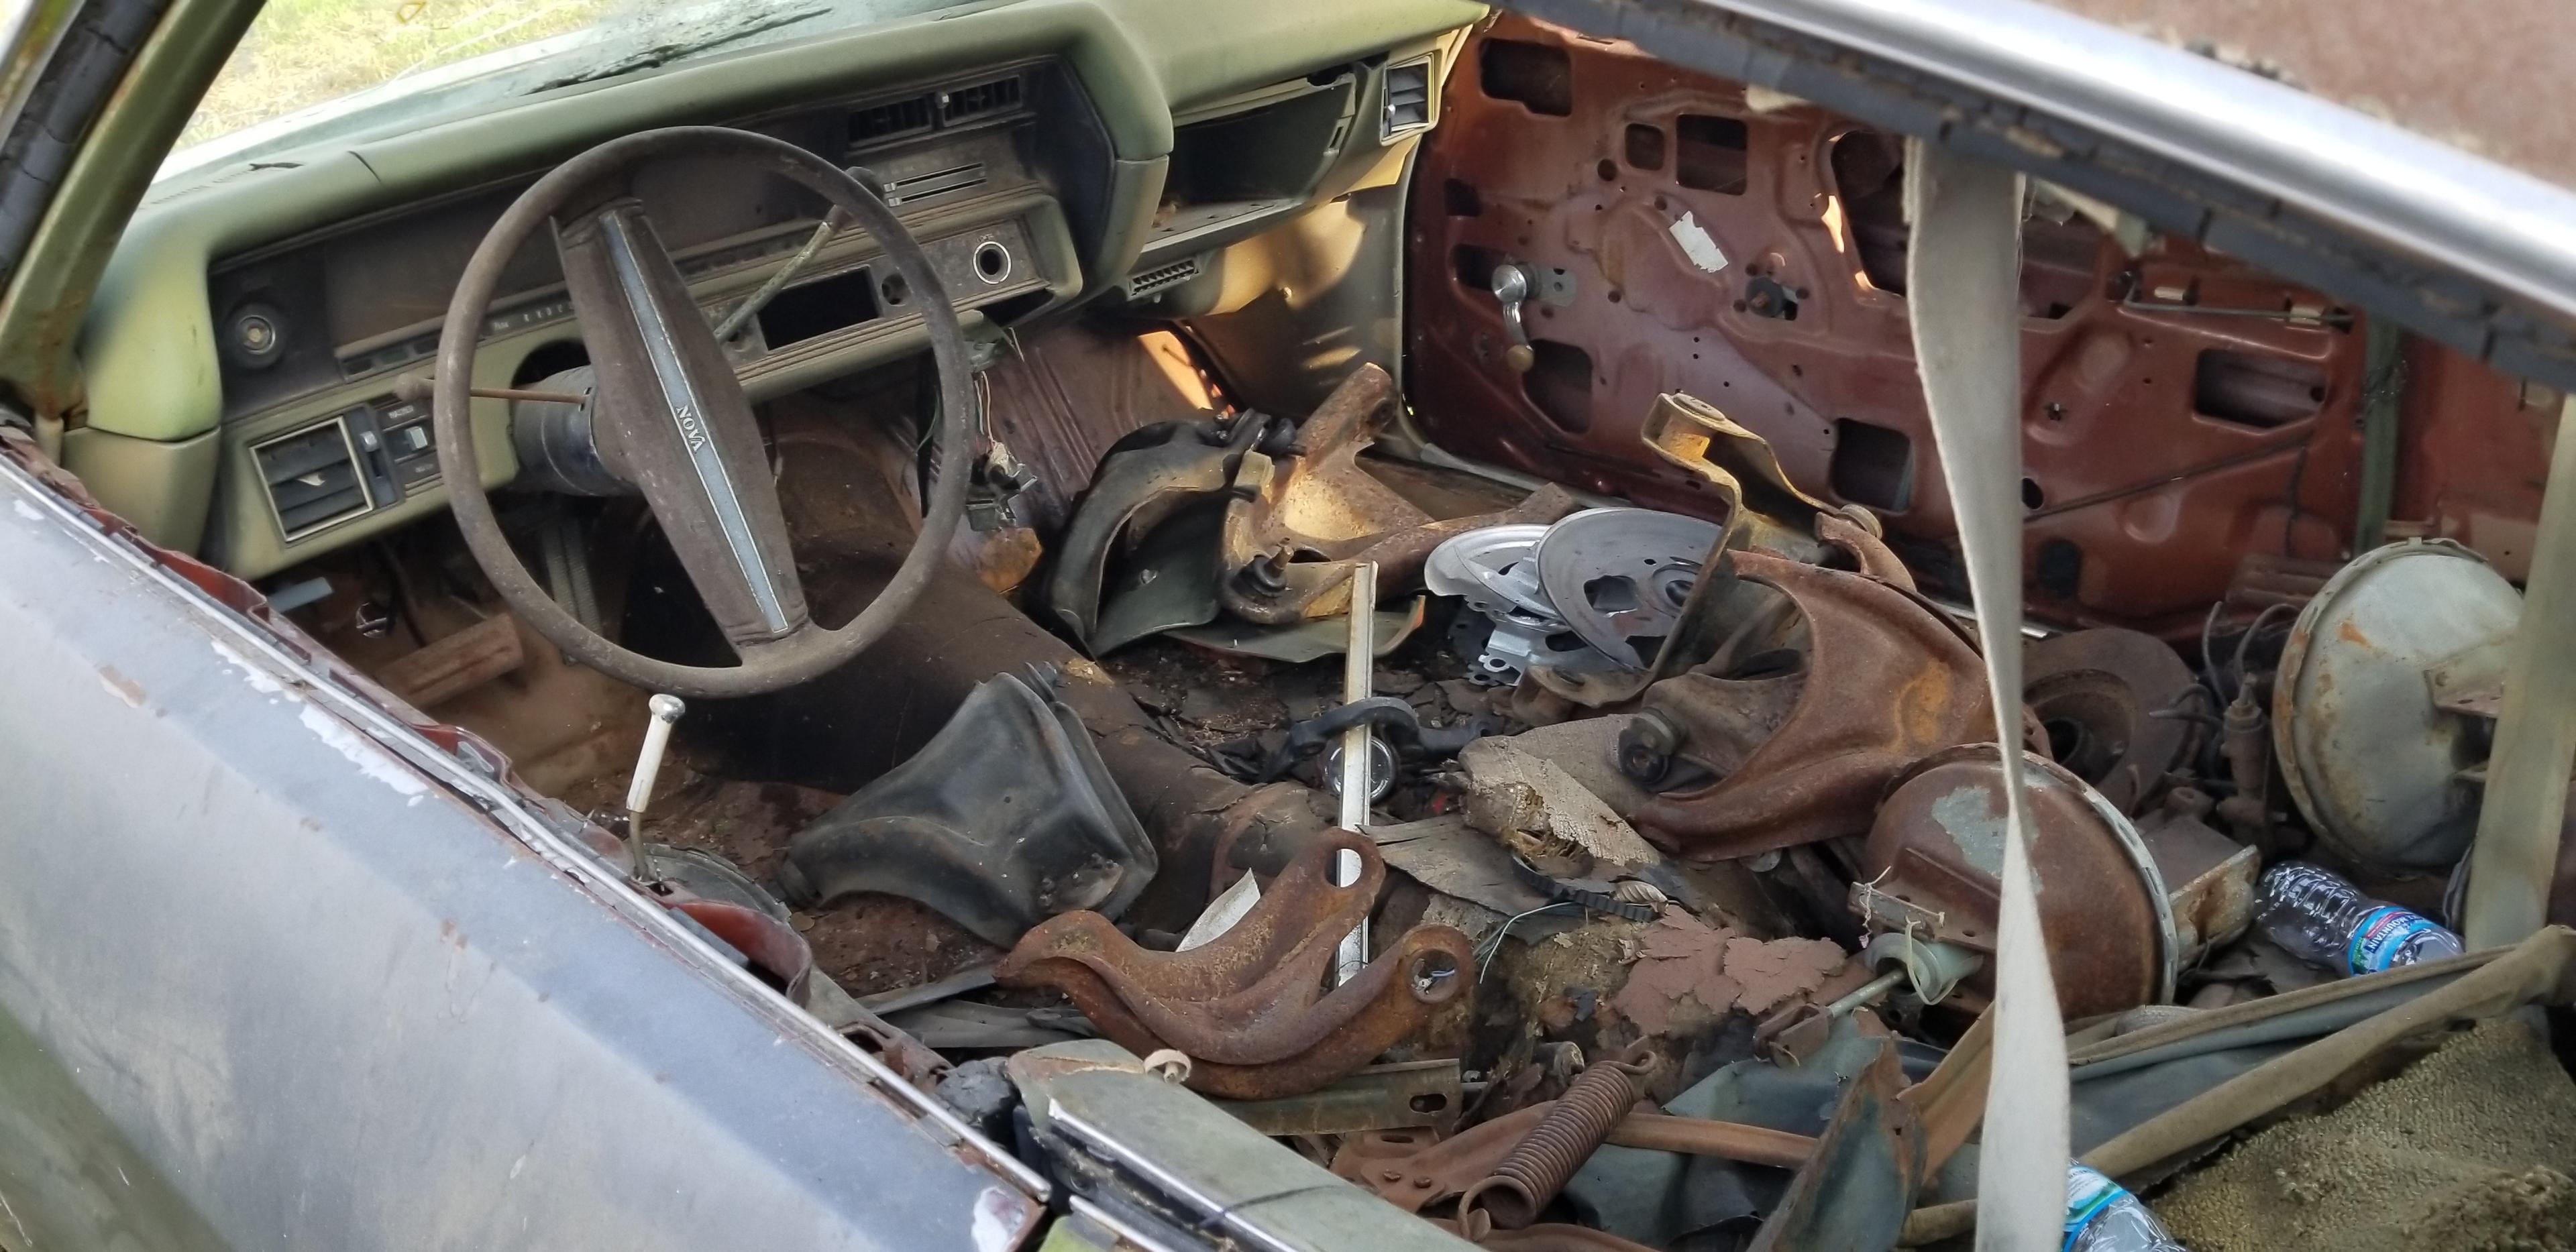 1971 Chevrolet Chevelle Rolling Body for Project